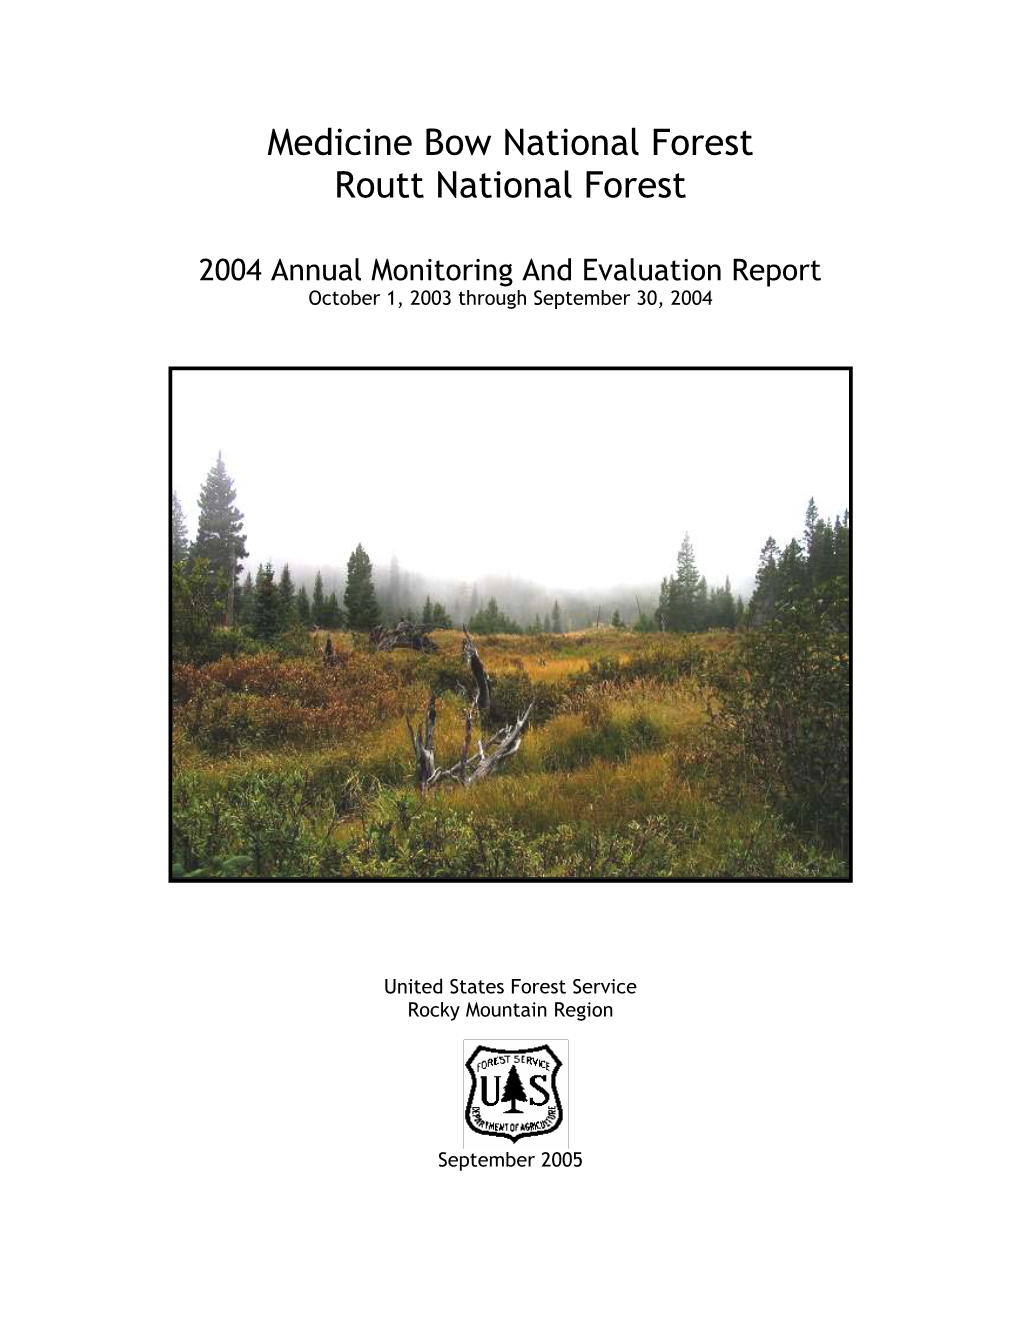 2004 Annual Monitoring and Evaluation Report October 1, 2003 Through September 30, 2004